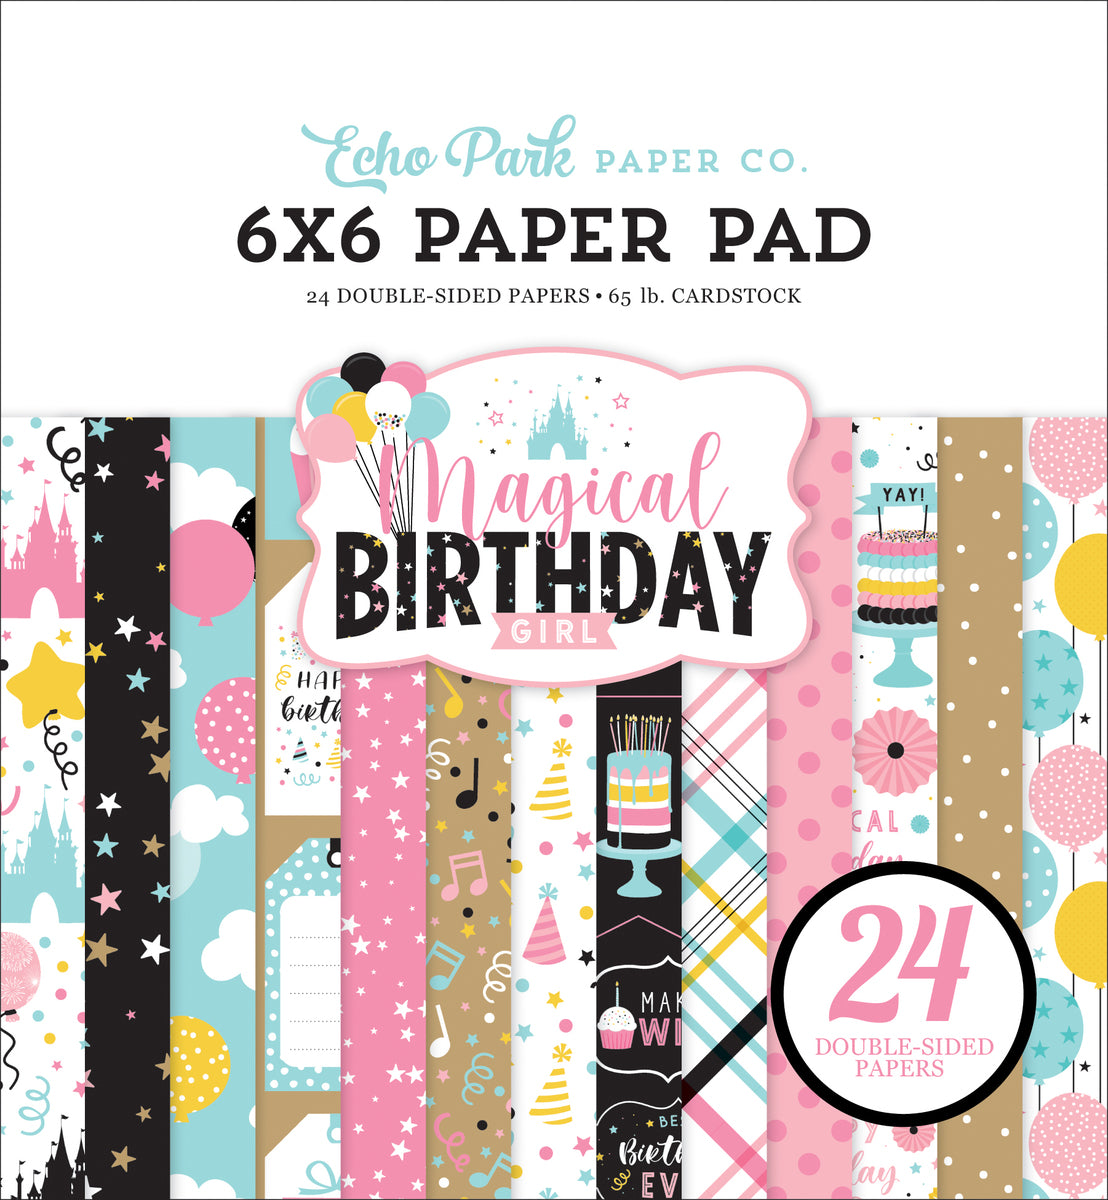 MAGICAL BIRTHDAY GIRL - fun 6x6 pad with 24 double-sided patterned papers in birthday theme - Echo Park Paper